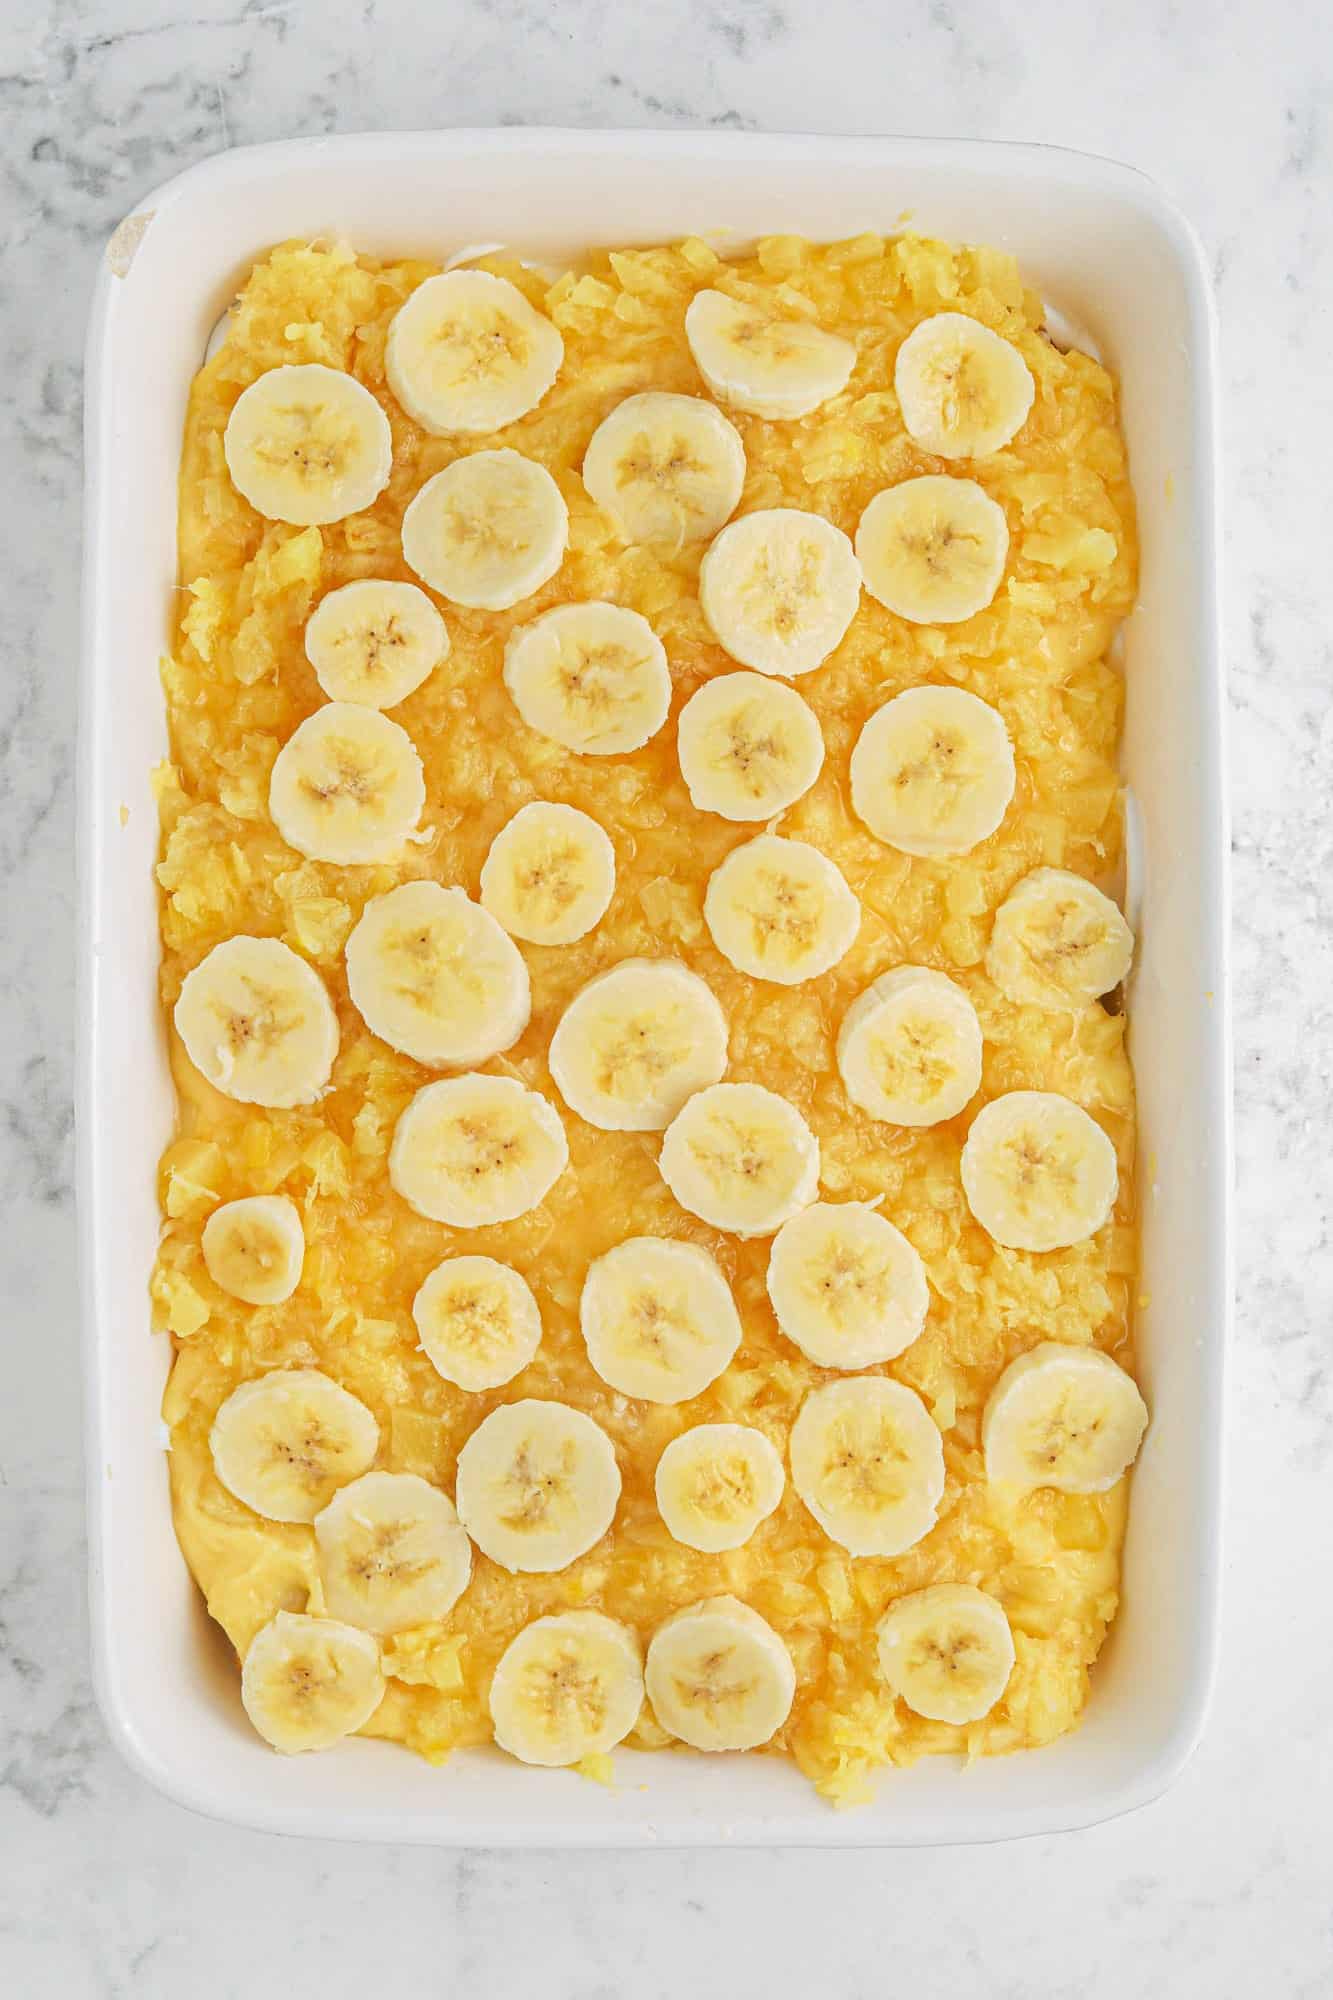 Banana slices layered over crushed pineapple in a 9x13 ceramic white dish